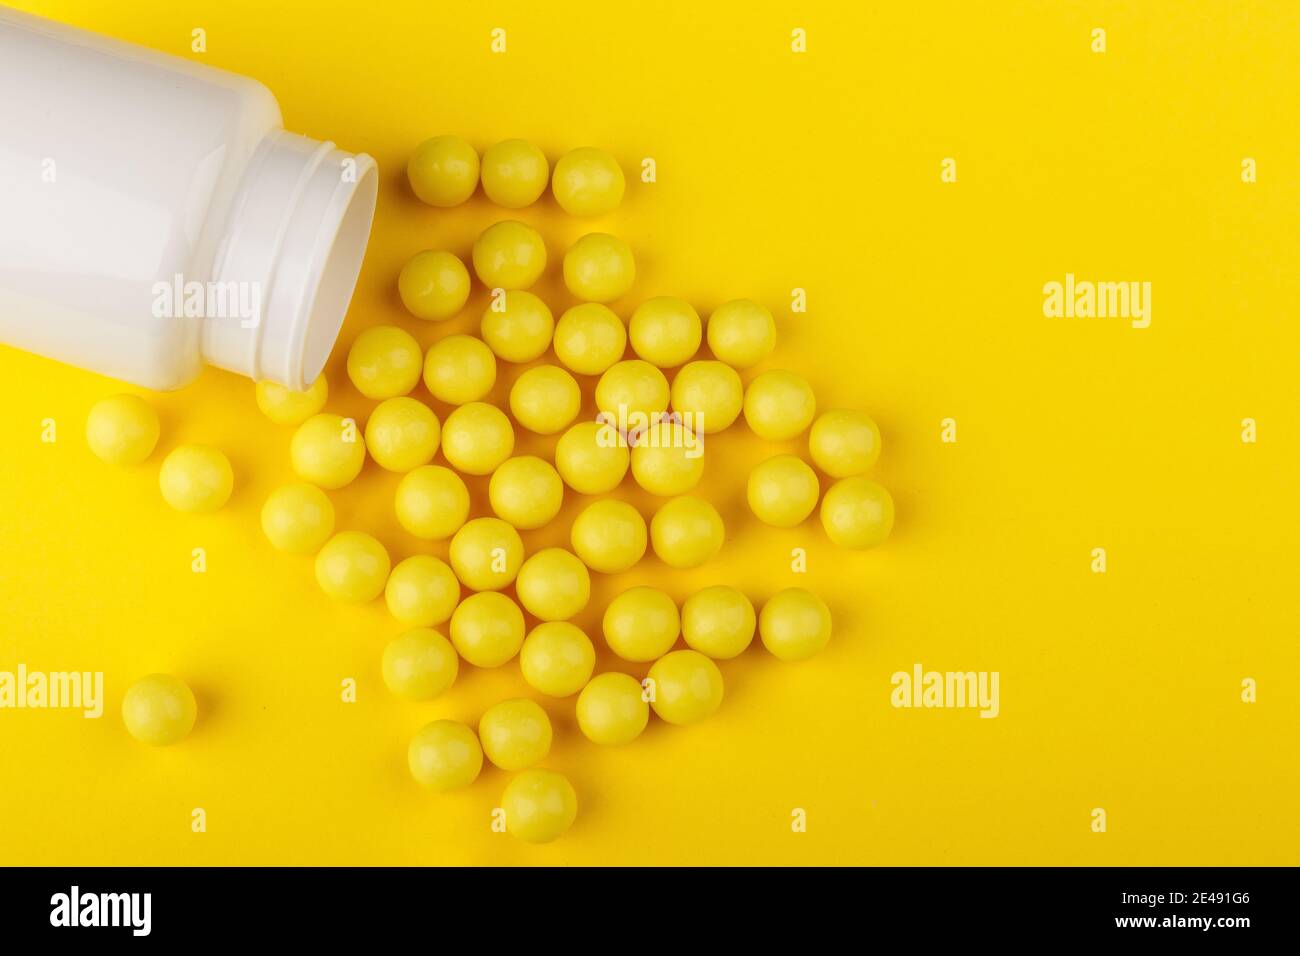 Vitamin capsules. Vitamin C pills and pill bottle on yellow background. Top view. Stock Photo